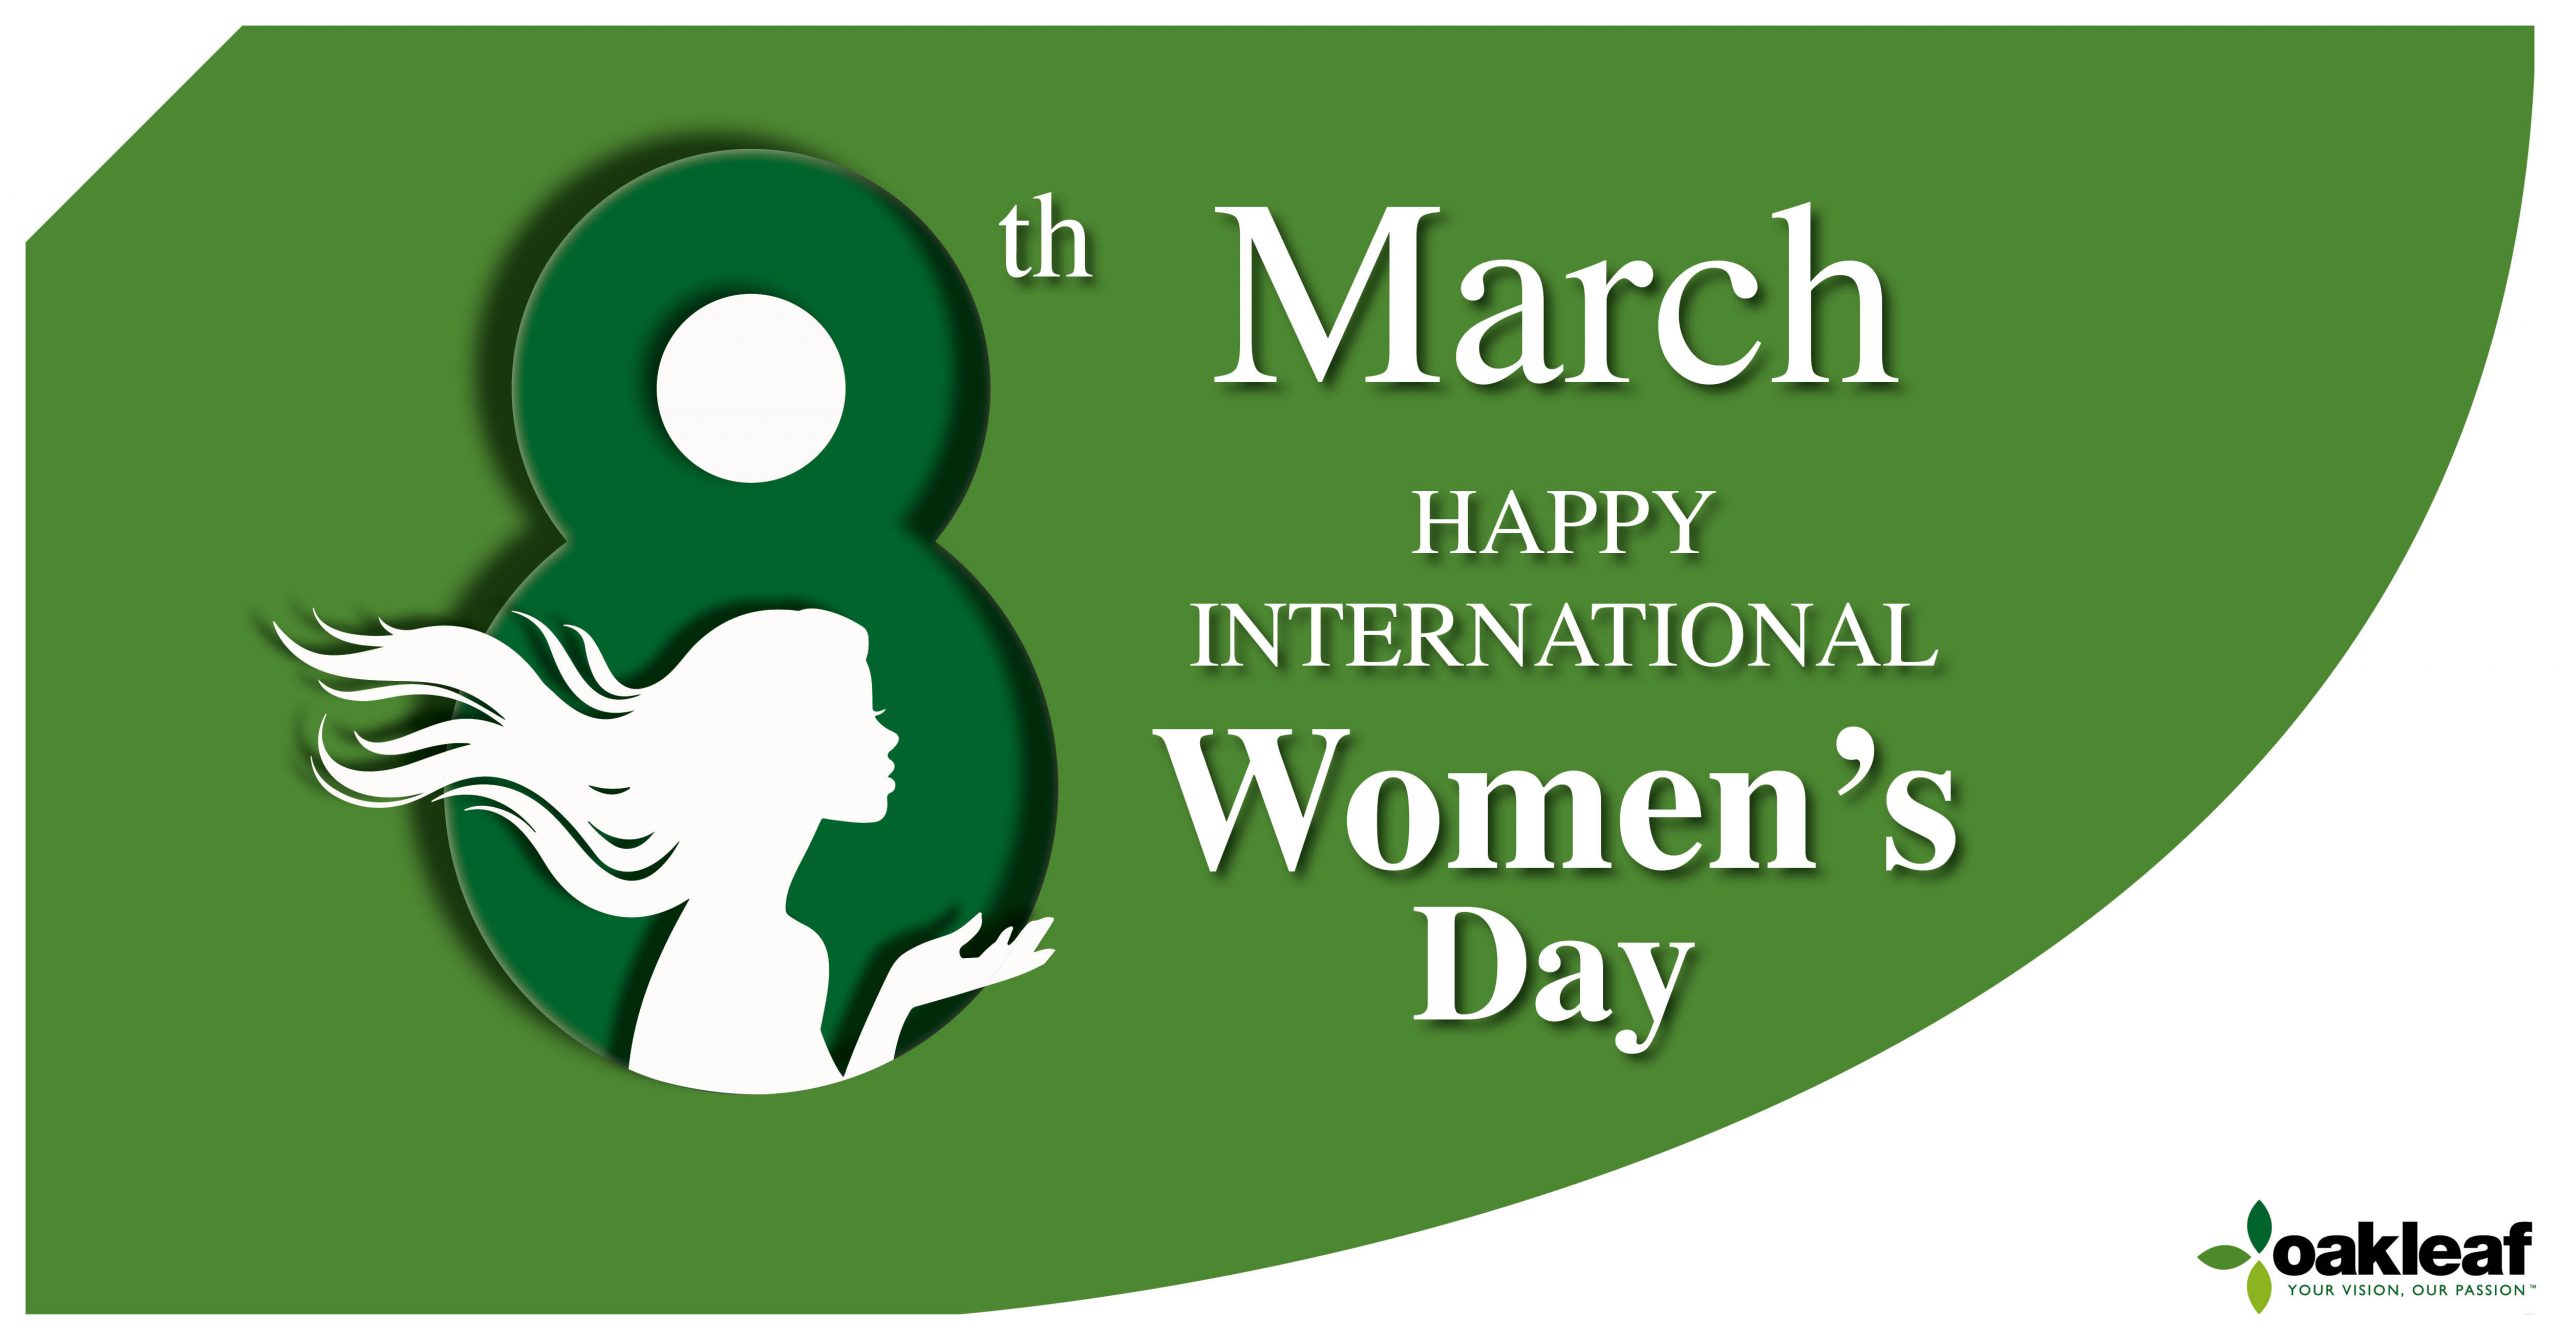 What does International Women’s Day mean for HR?